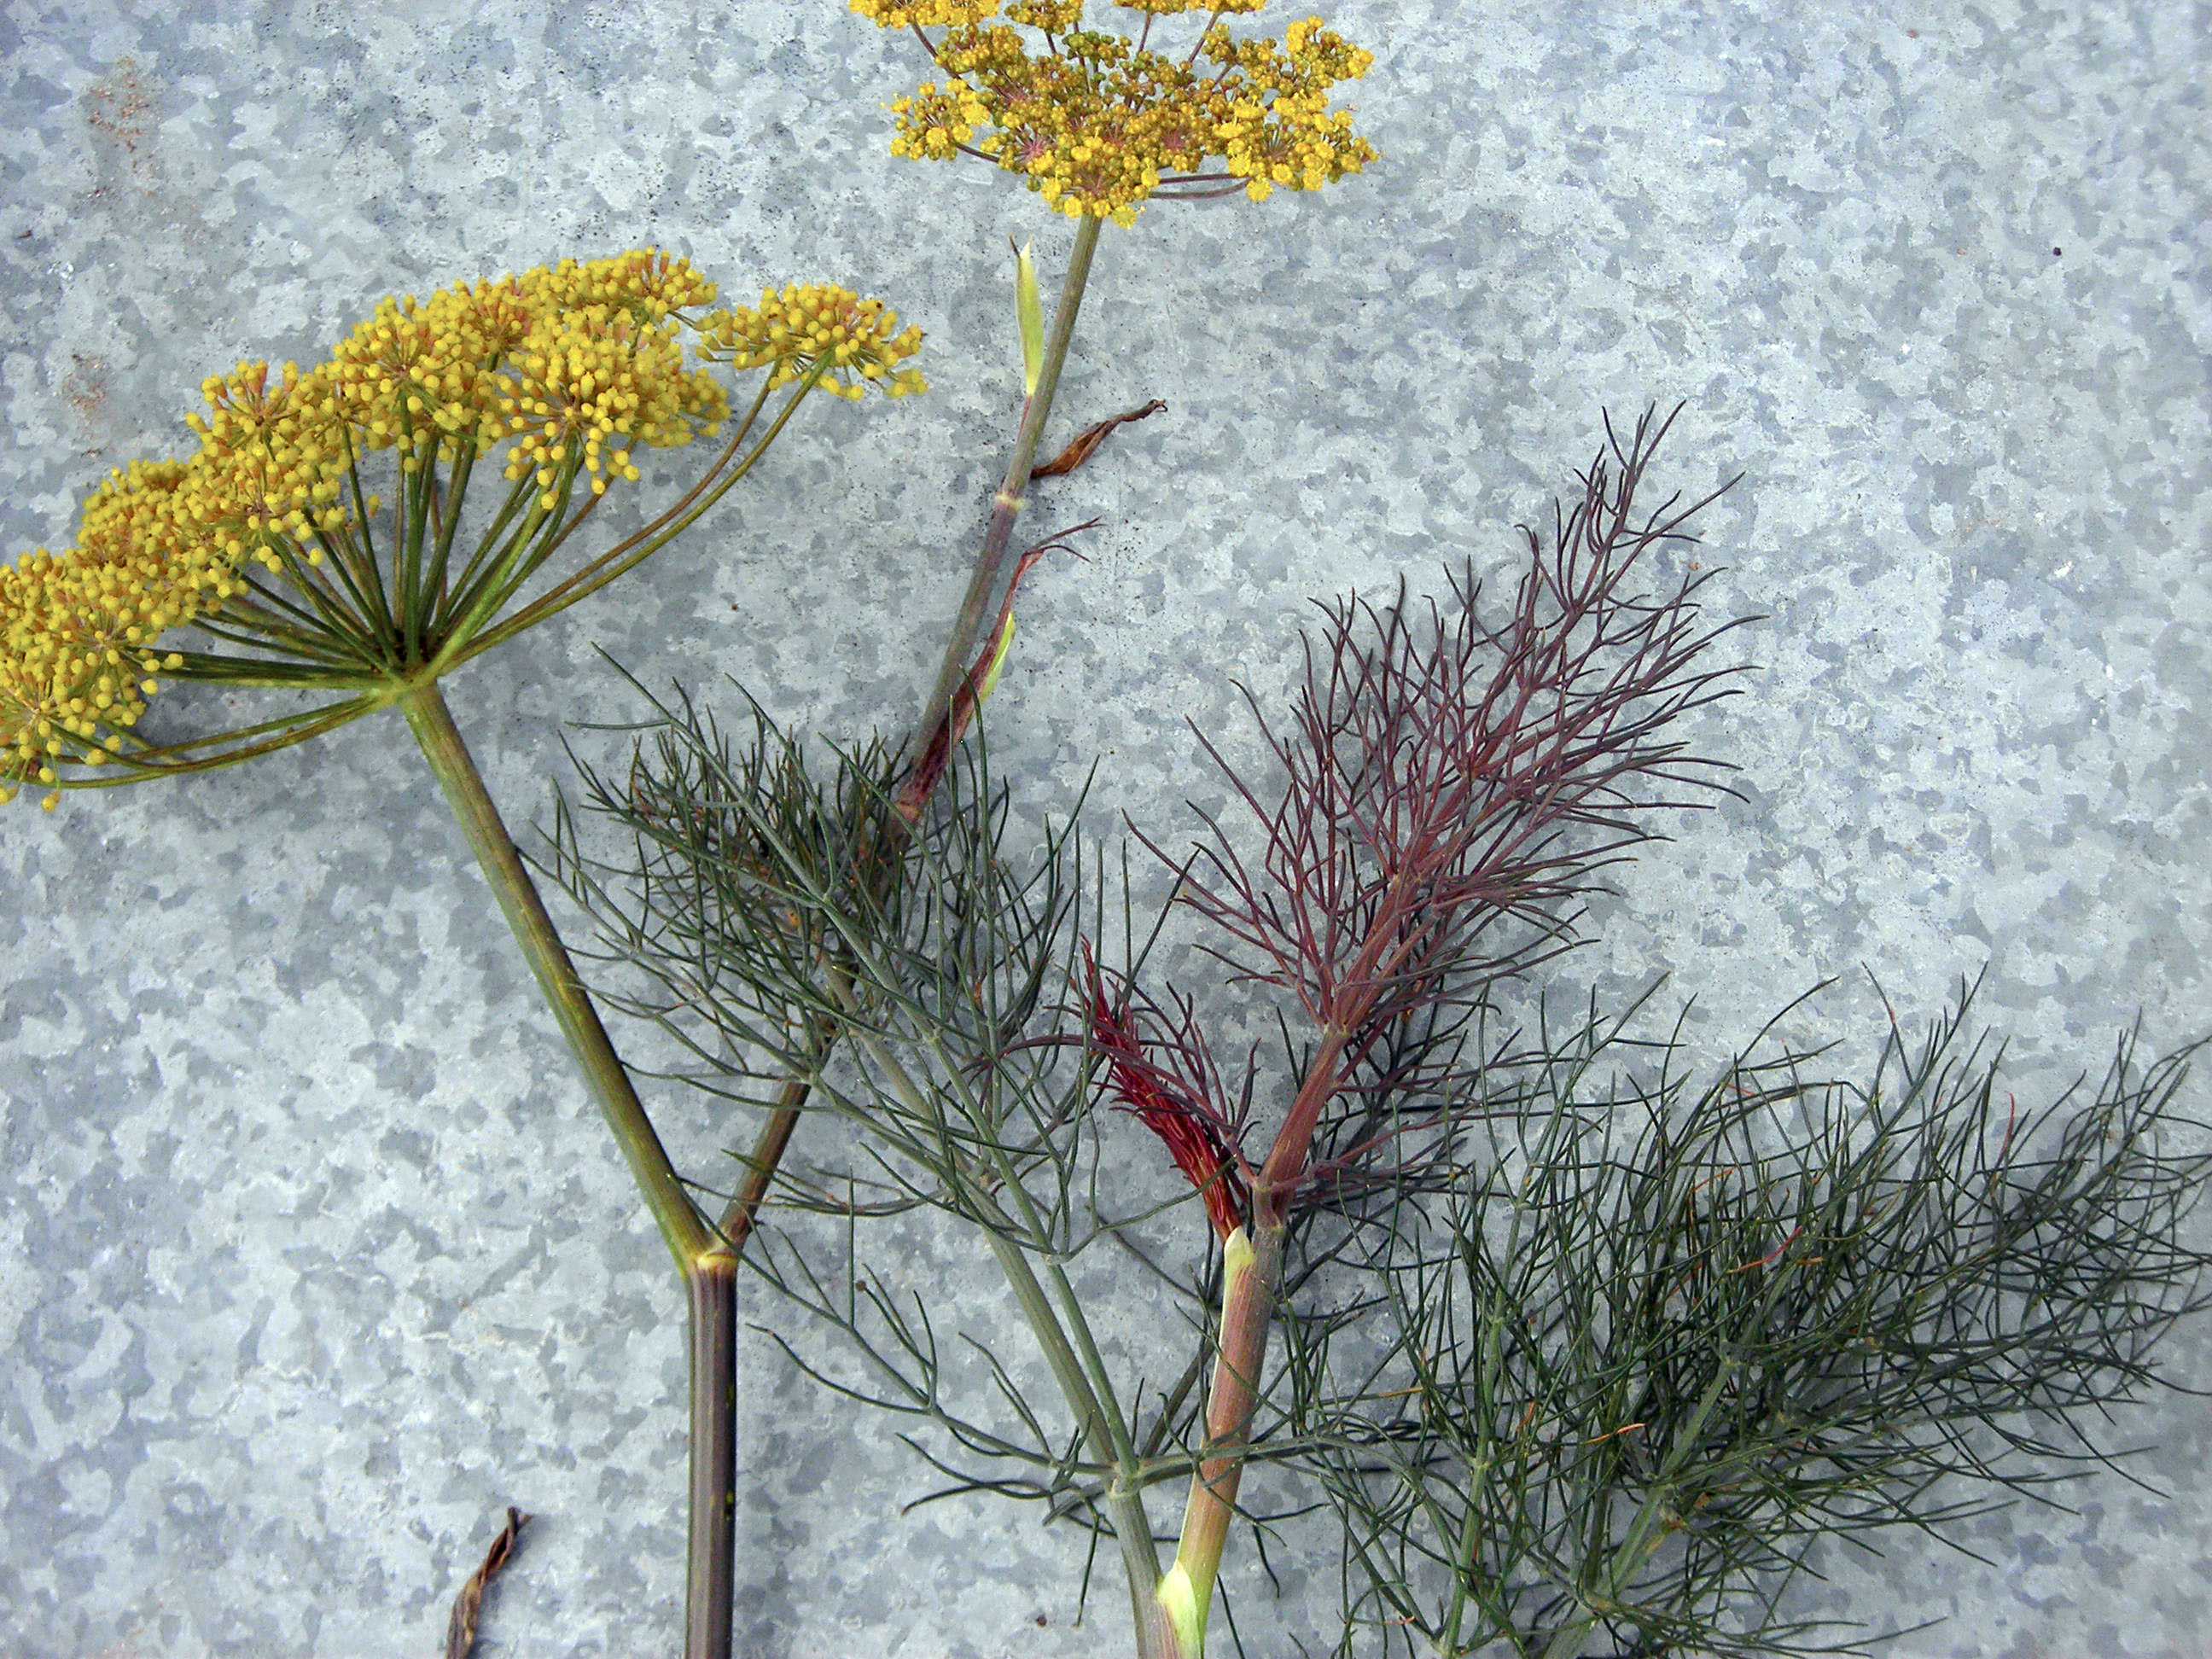 Bronze Fennel £1.25 for 30 seeds